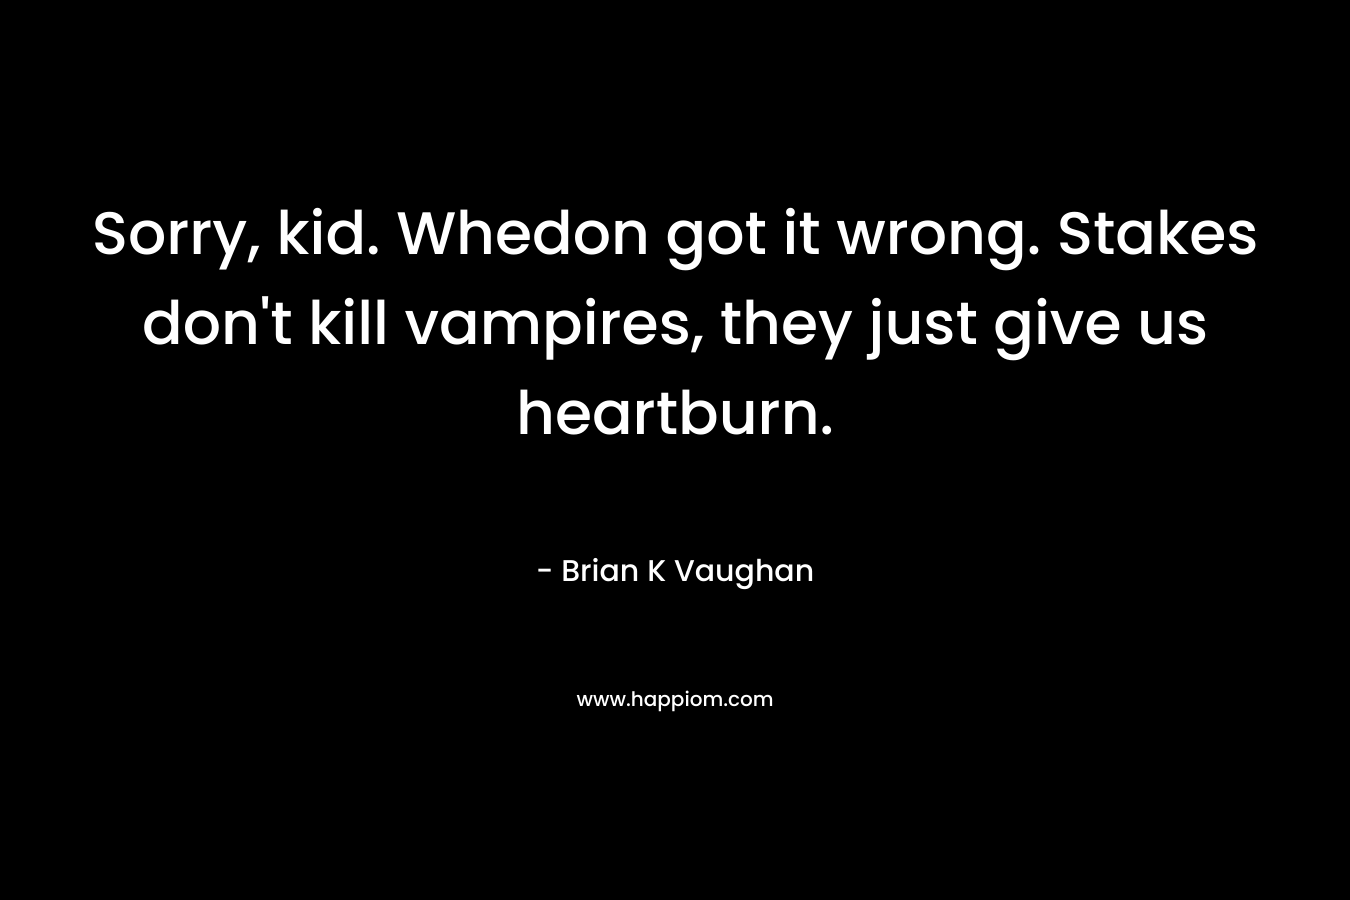 Sorry, kid. Whedon got it wrong. Stakes don't kill vampires, they just give us heartburn.